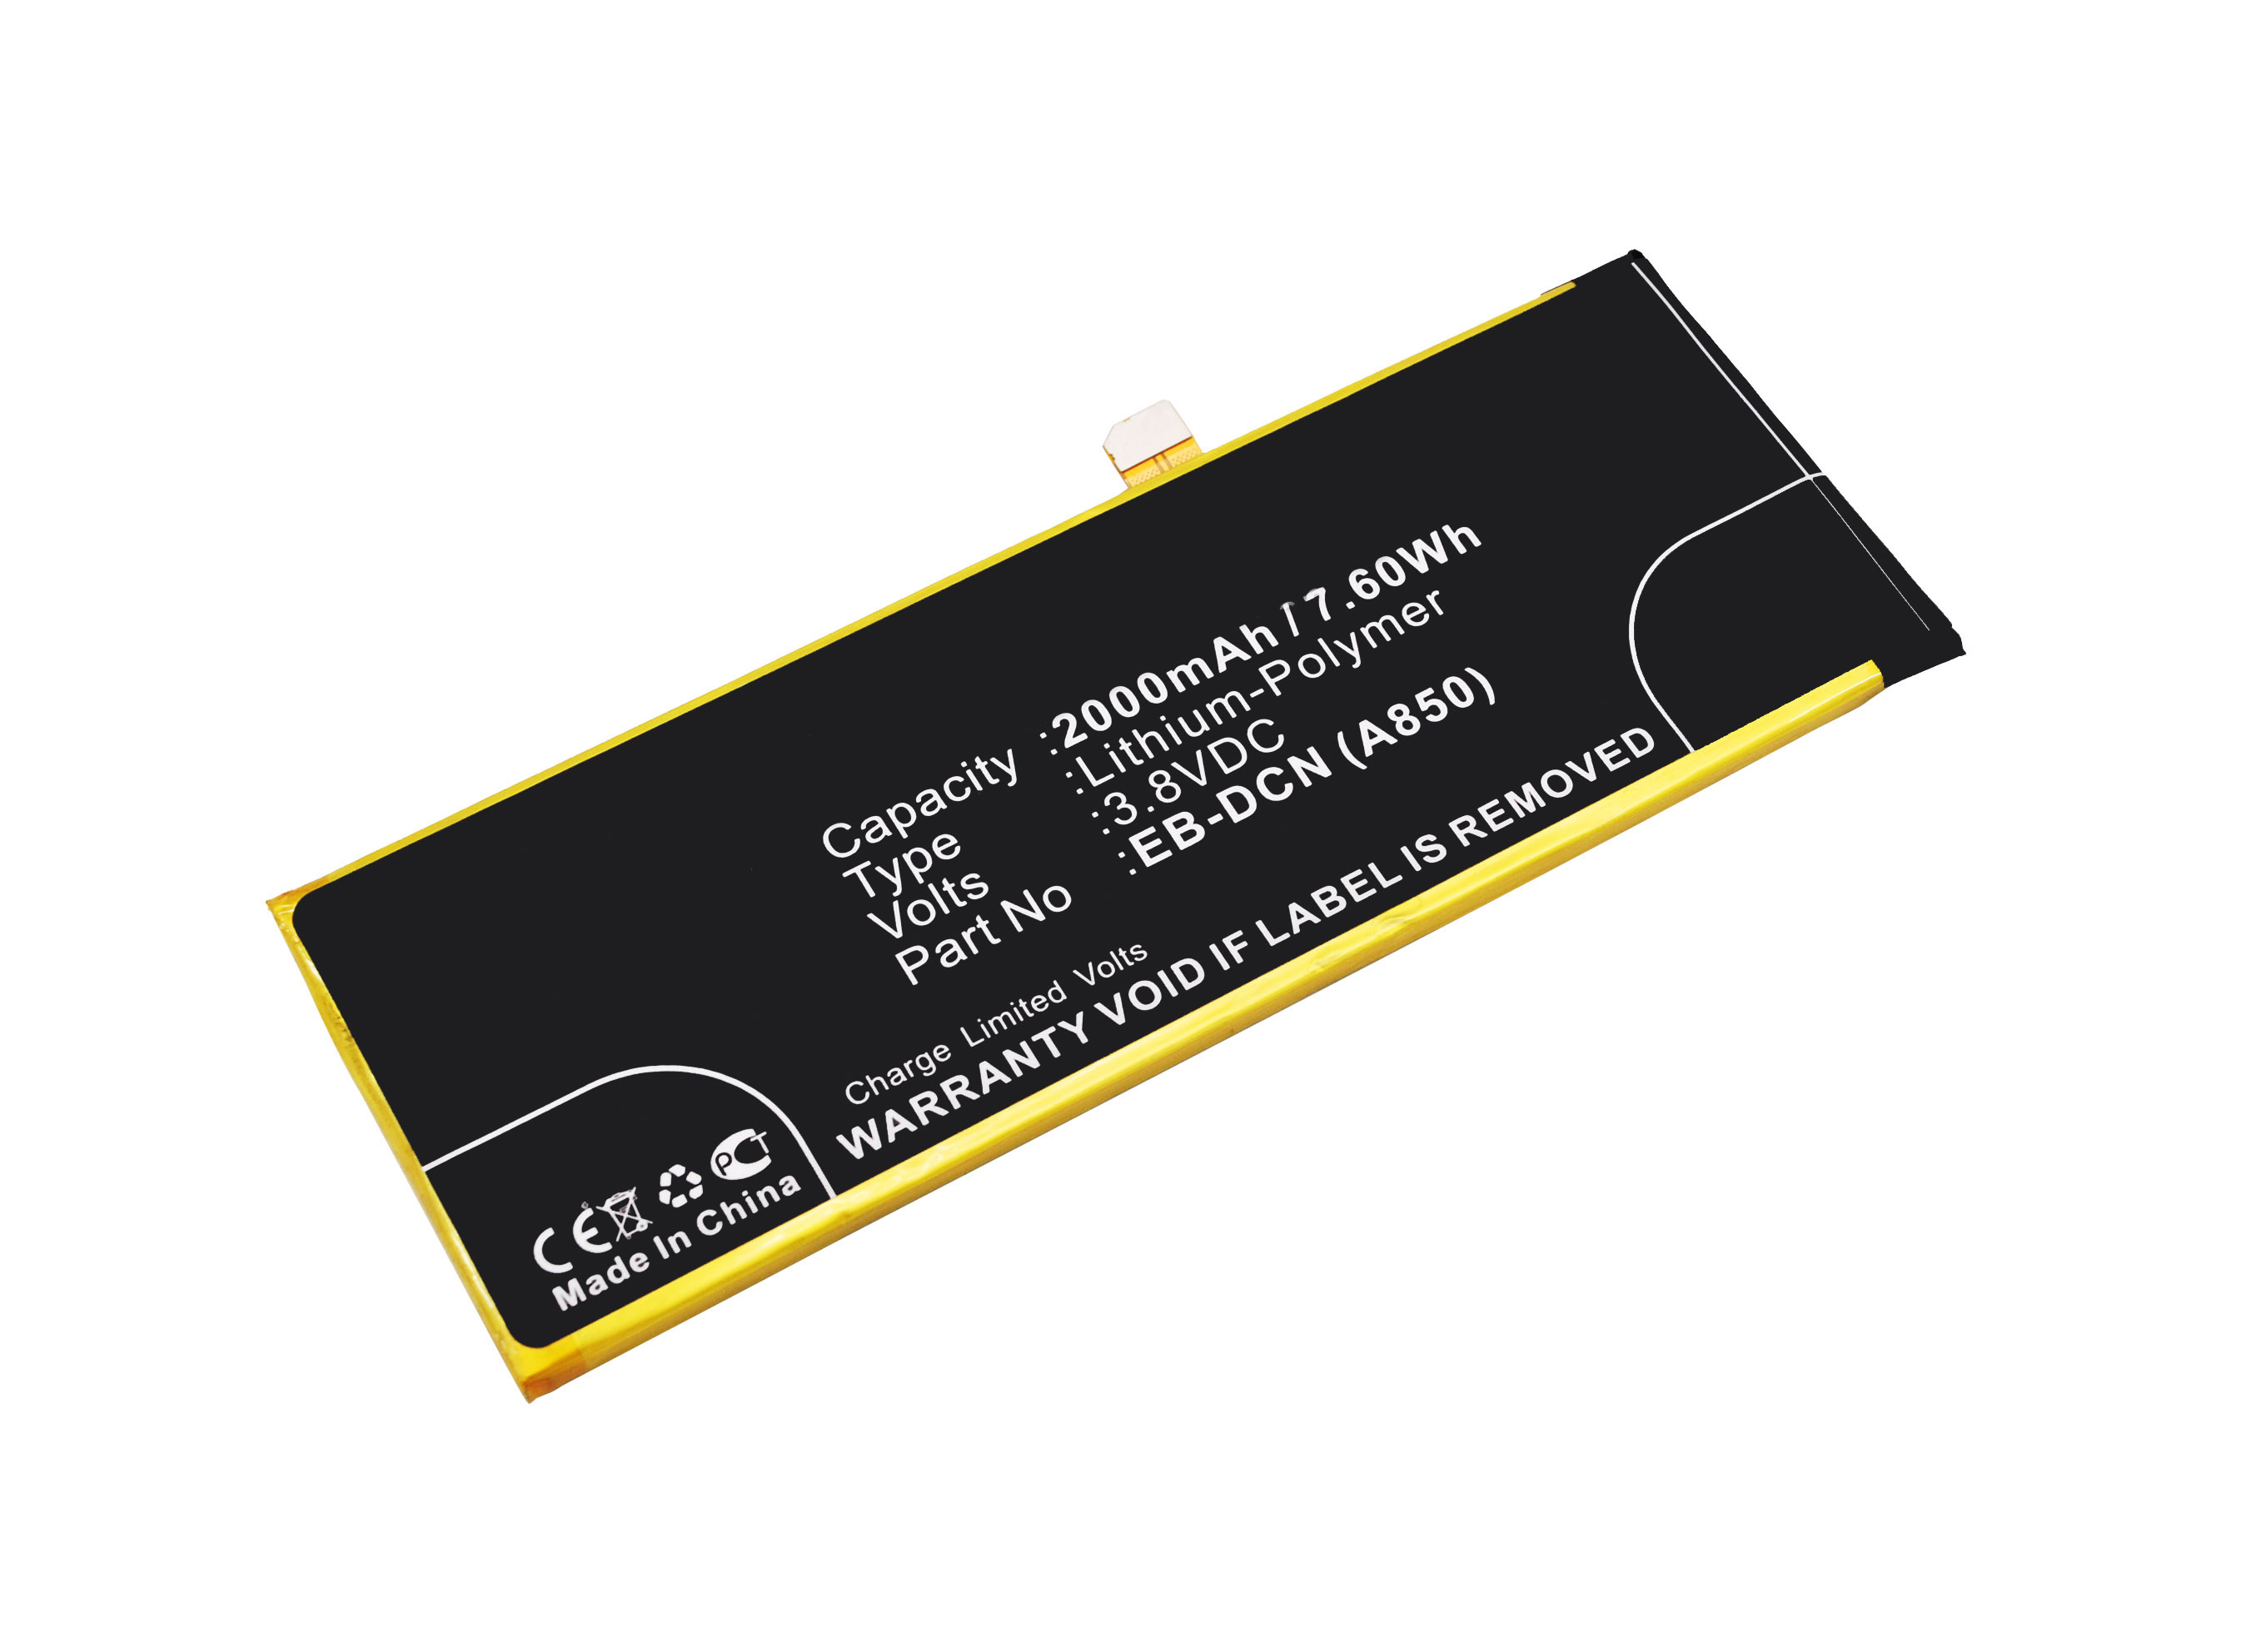 Synergy Digital Cell Phone Battery, Compatible with EBest EB-DCN (A850) Cell Phone Battery (3.8V, Li-Pol, 2000mAh)